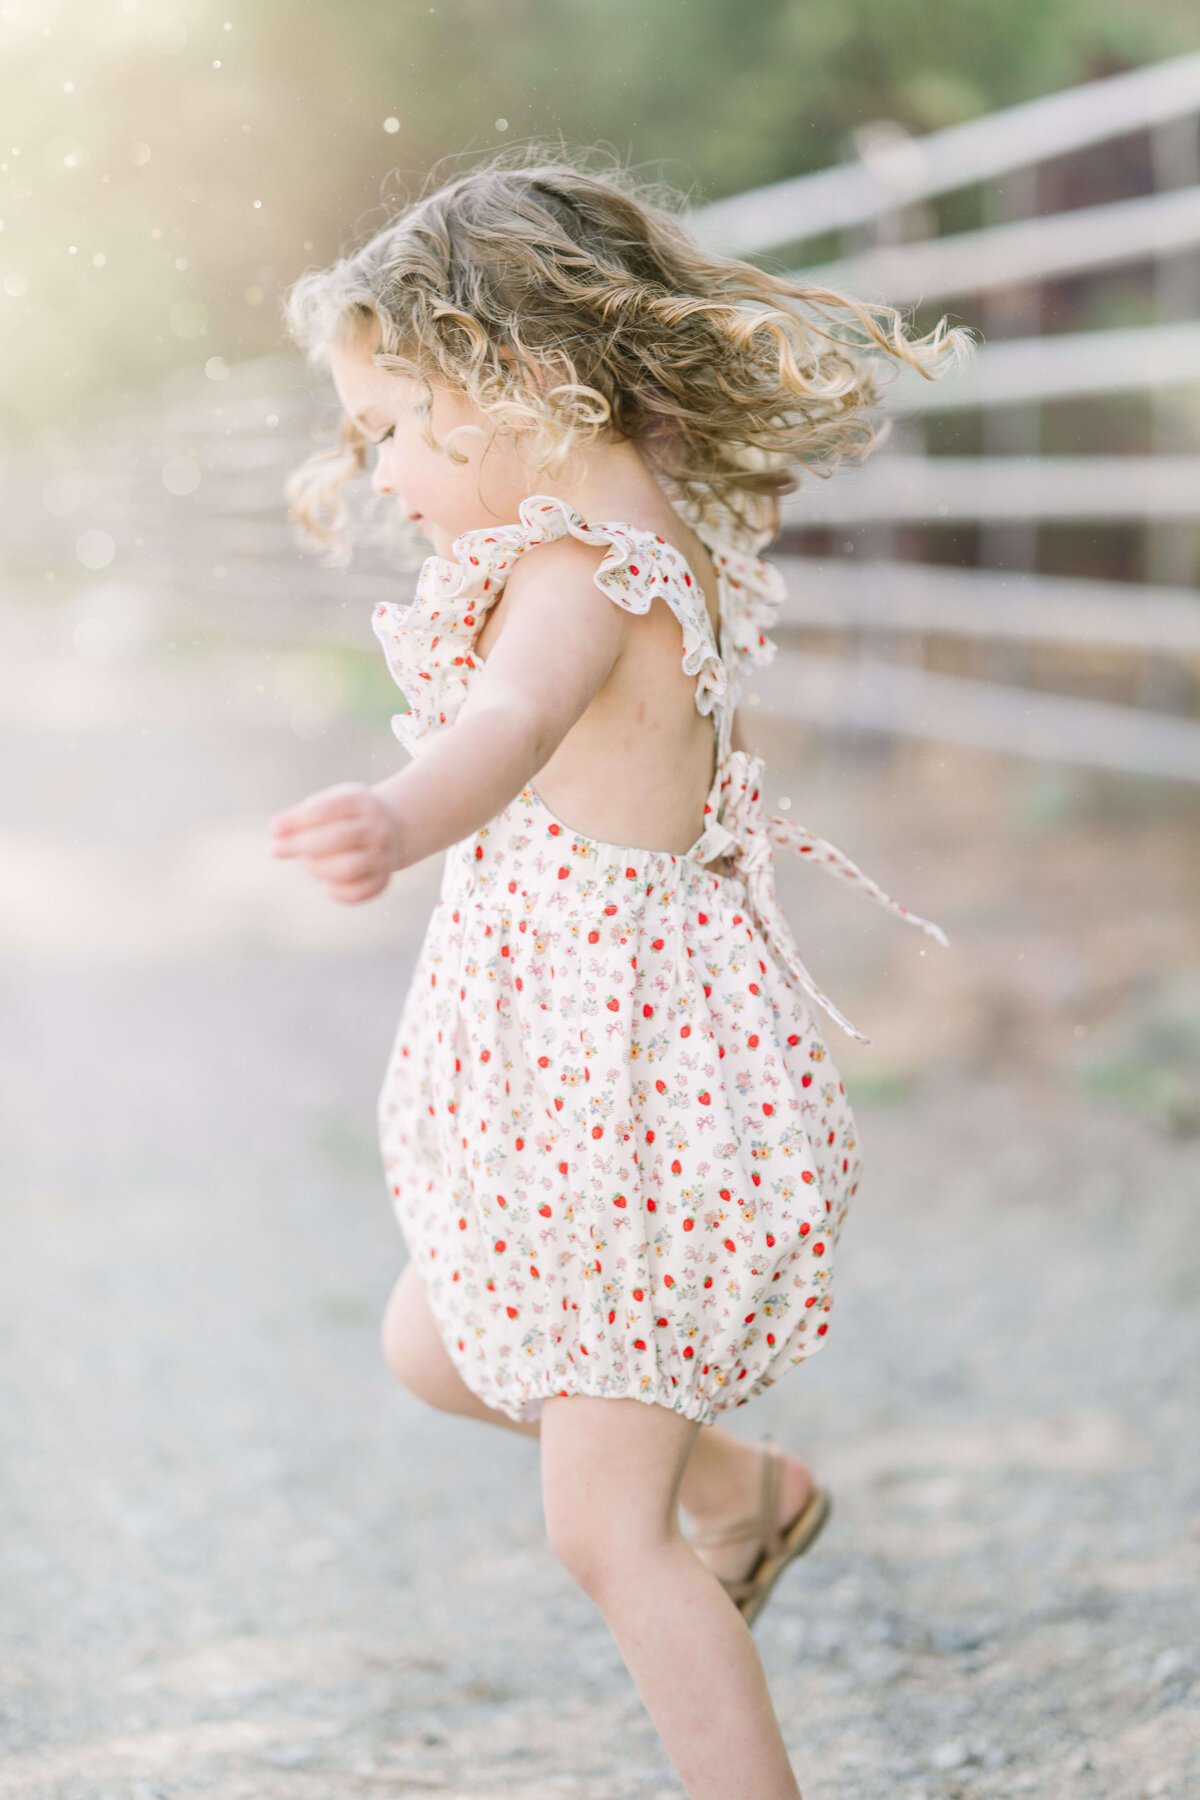 Young toddler with curly hair twirls in  strawberry bubble.